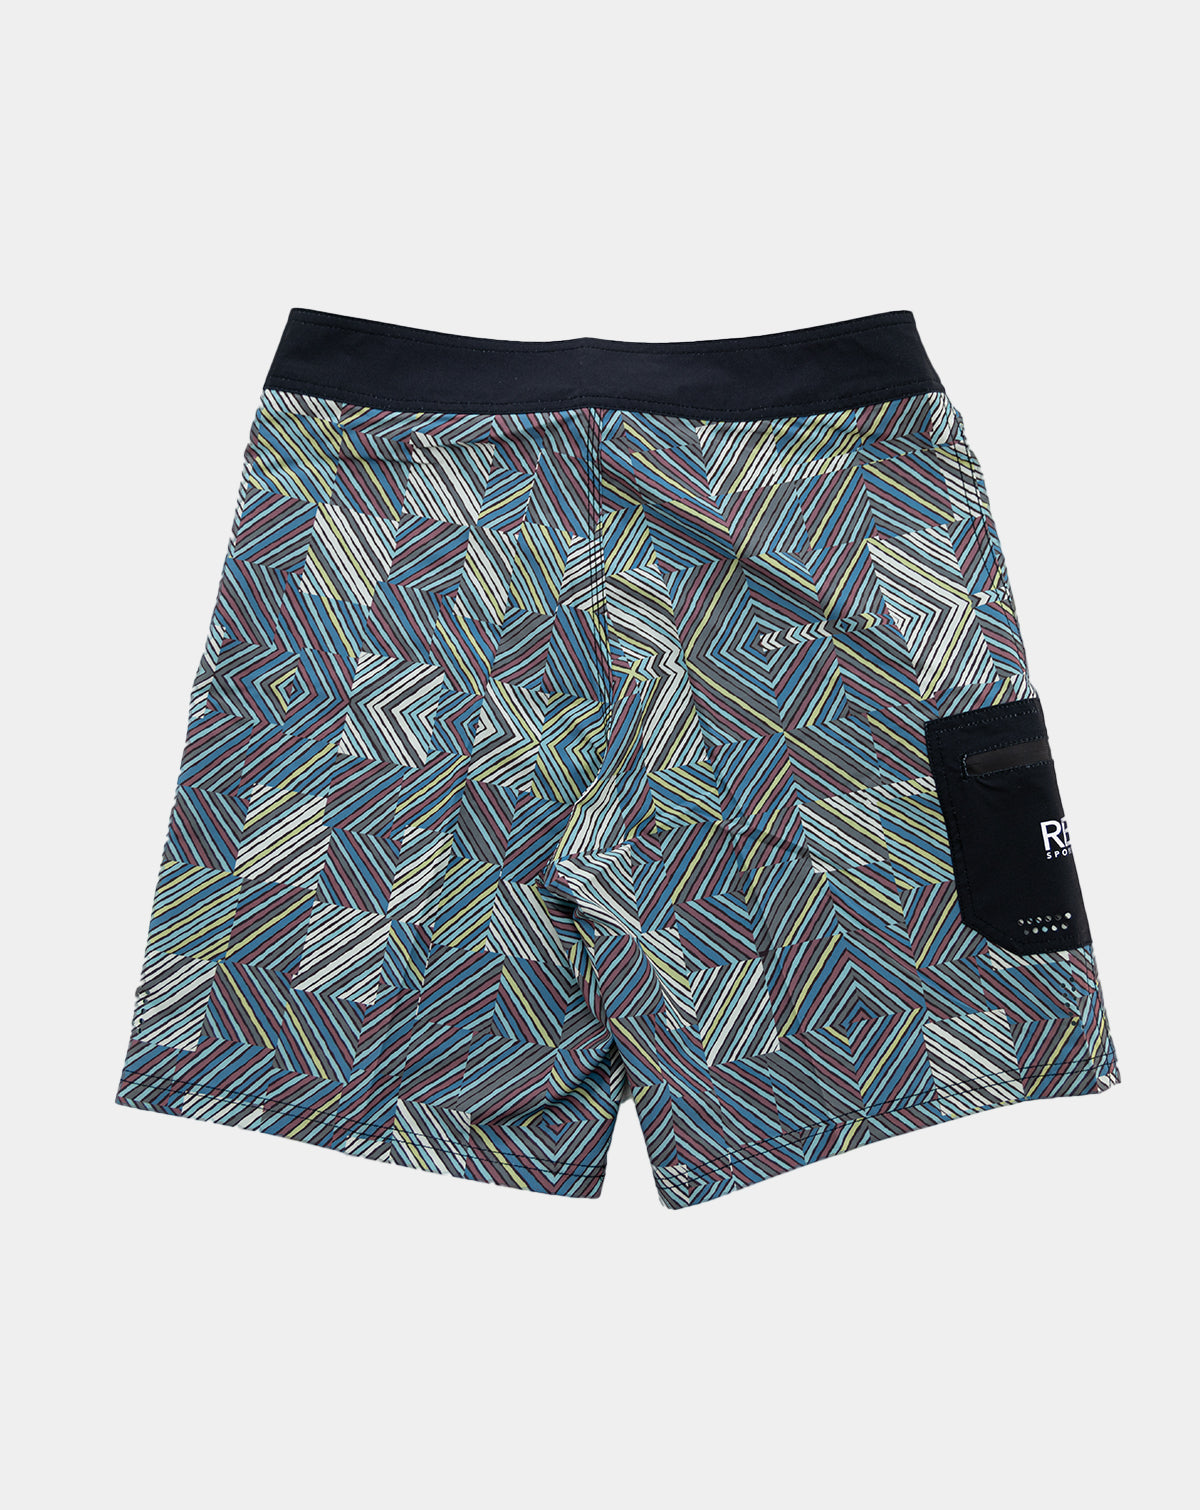 Multi-colored and black Lunkerbunker boardshorts for men with a stylish design, featuring UPF30+ 4-way stretch fabric, quick-dry technology, anti-microbial properties, fixed waist, double bonded butt seam for added strength, side zipper pocket, laser cut holes, 21&quot; outseam and side patch pockets for ultimate fishing performance.